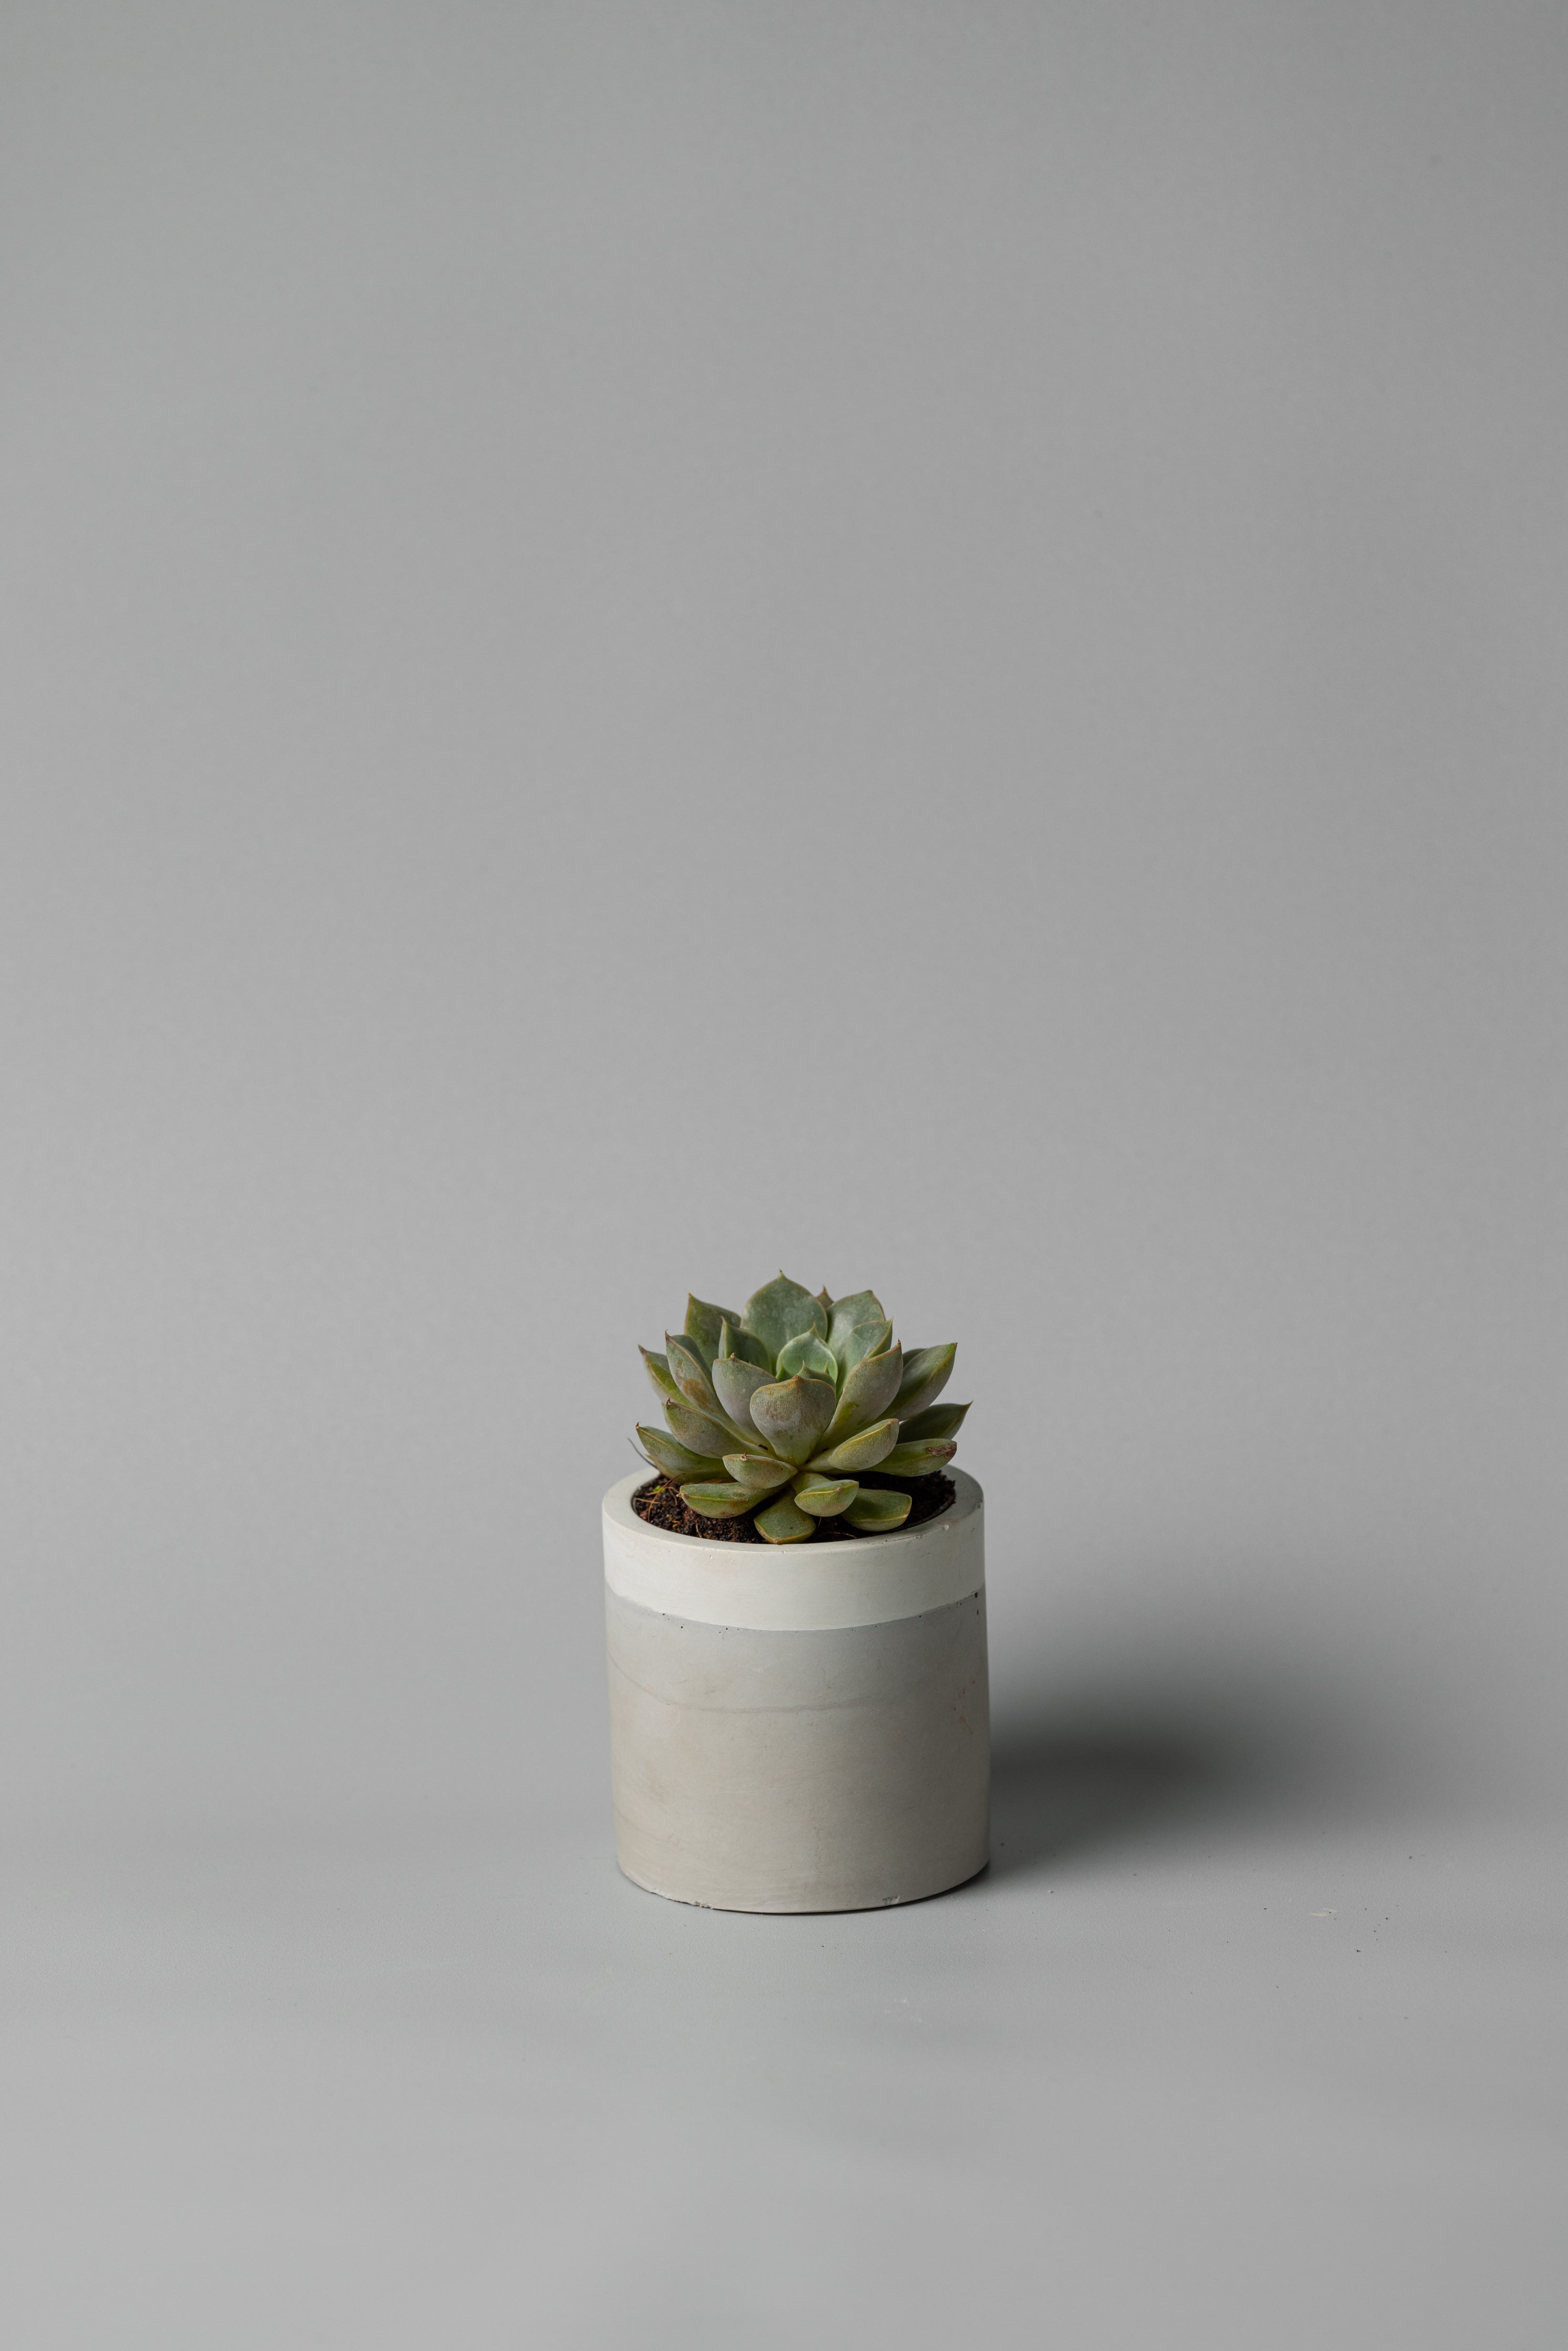 3" concrete cylinder planter in white gray